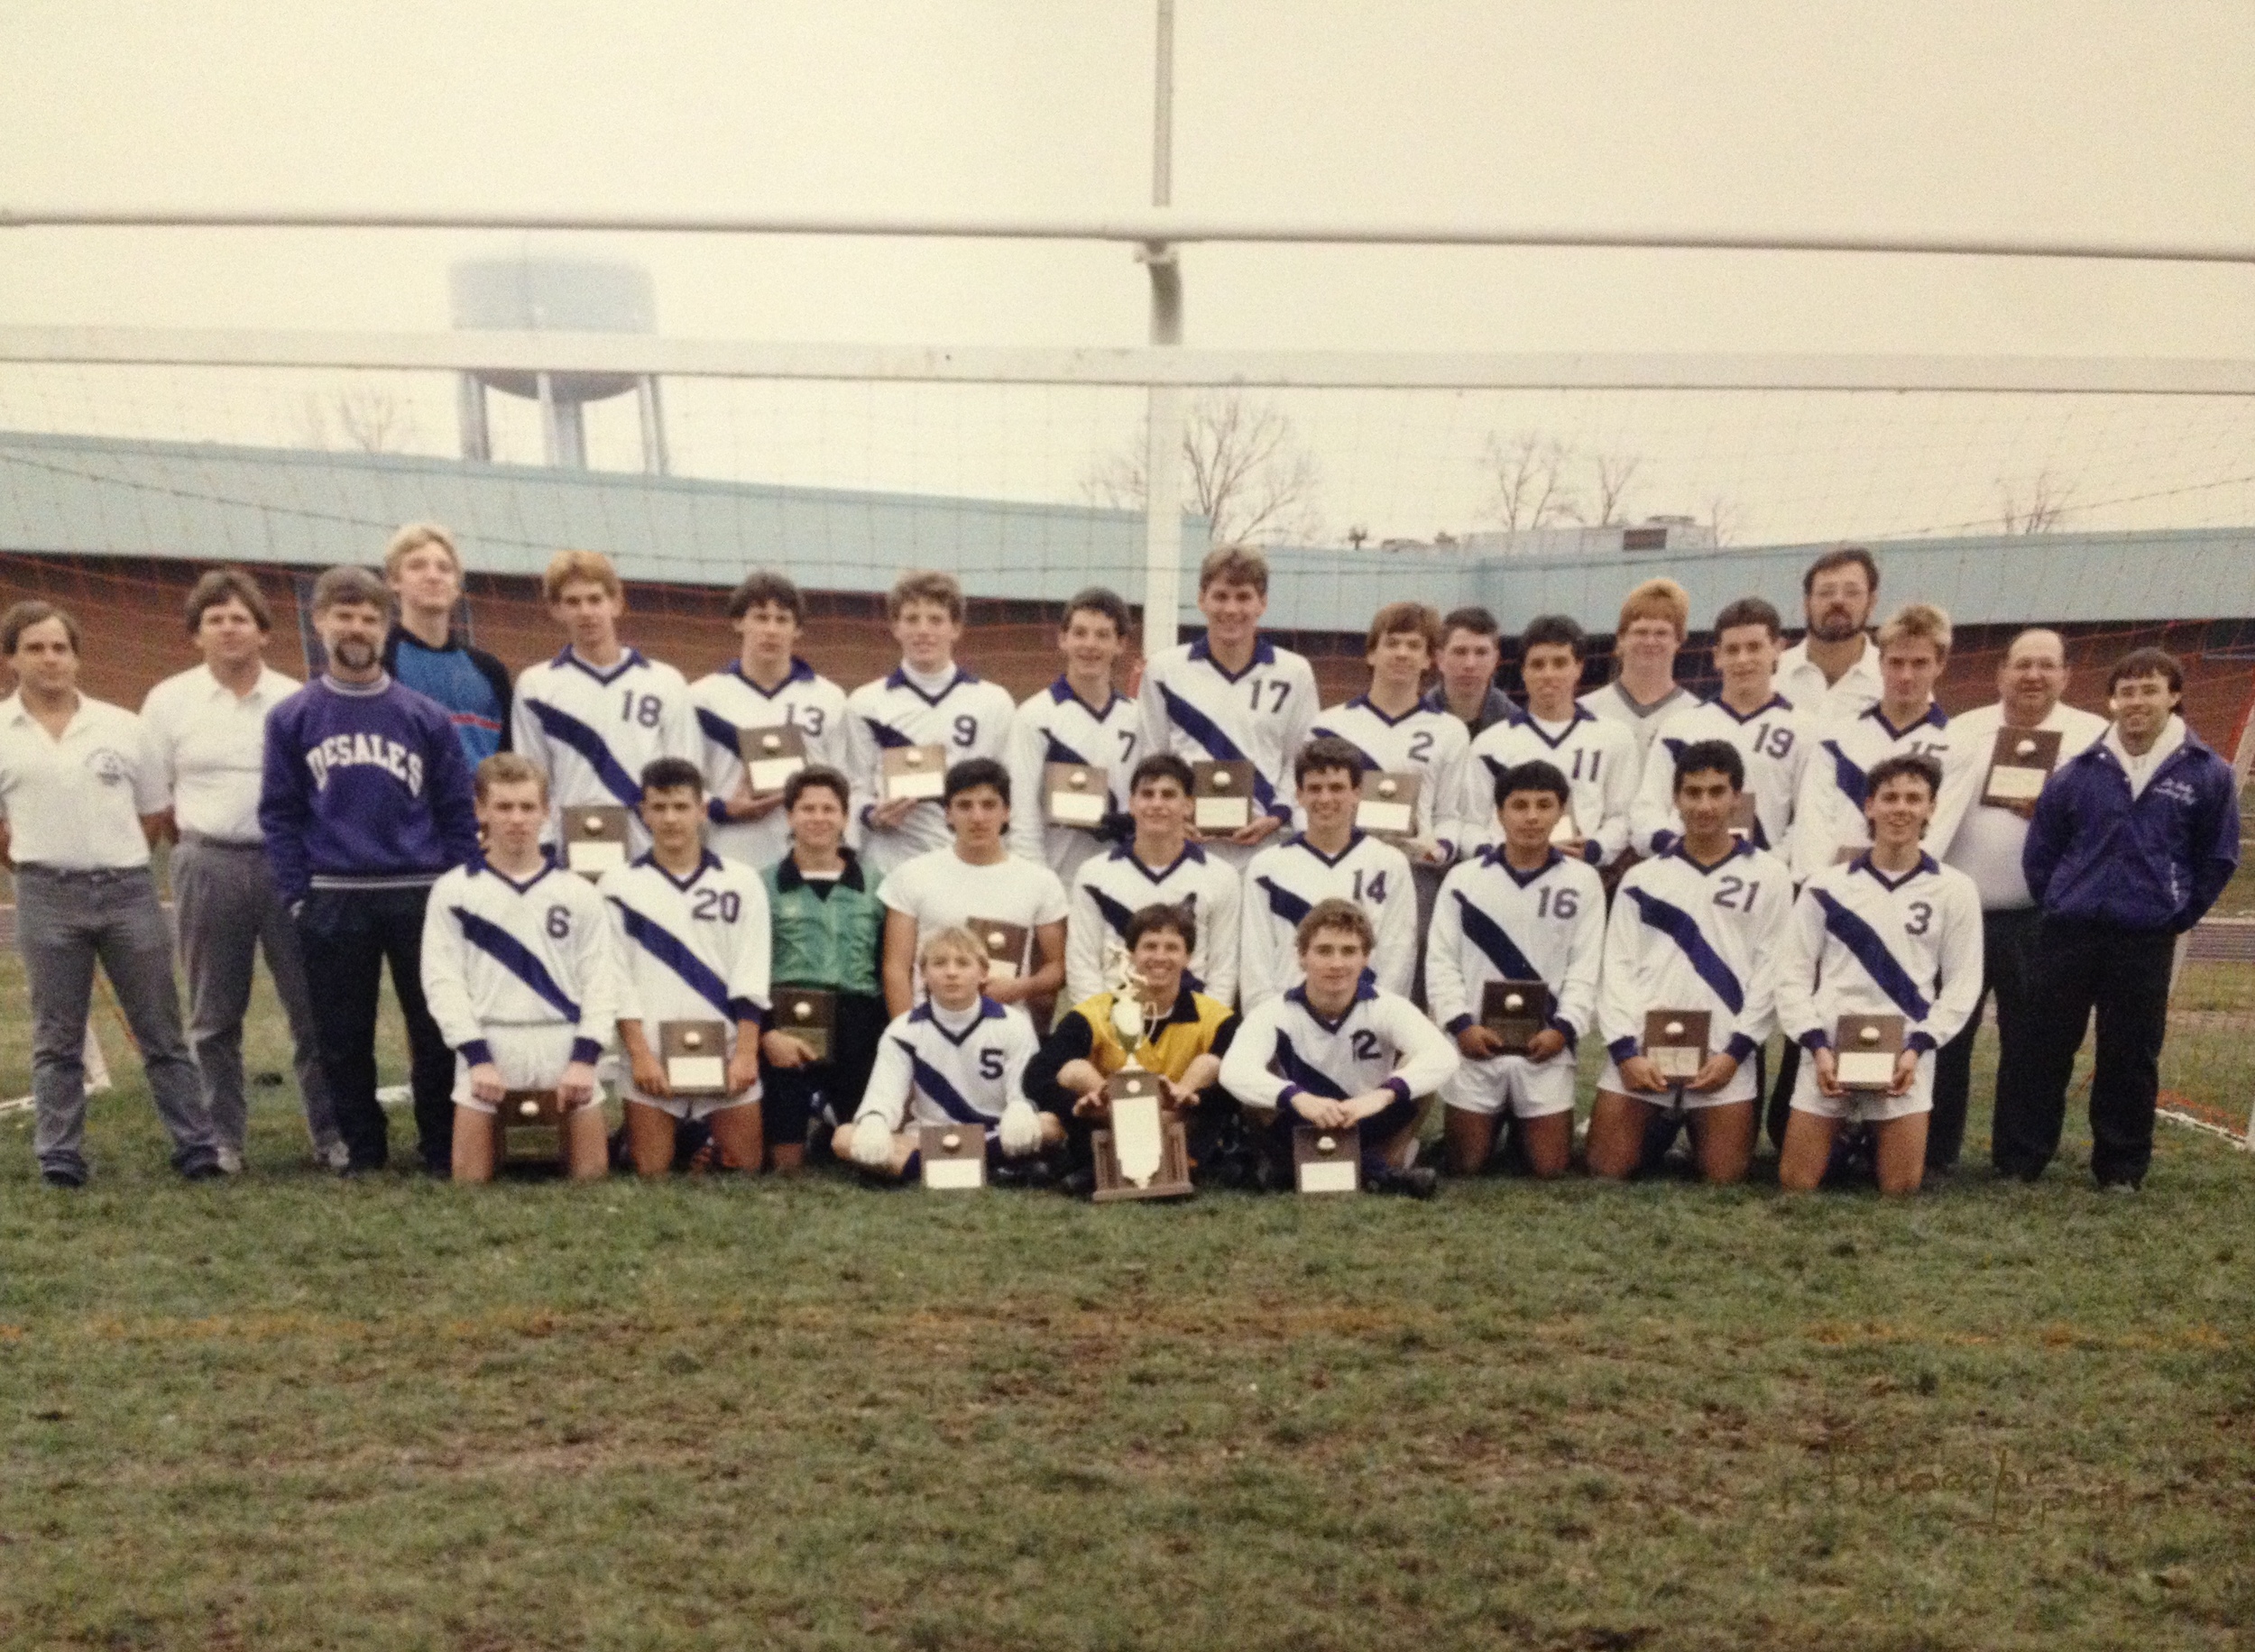   1986 STATE CHAMPIONS  Boys Soccer 